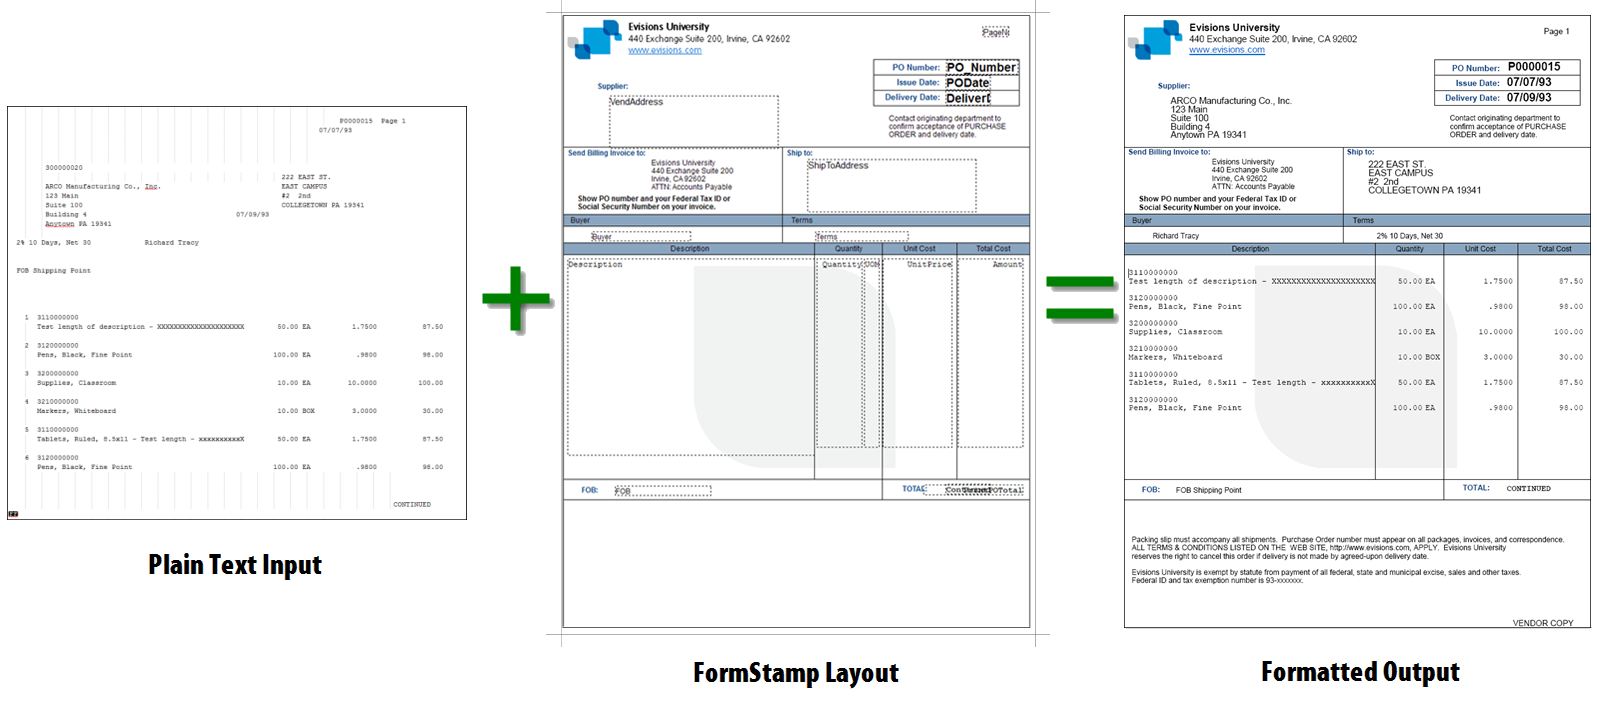 Image of the plain text input file + the template in FormFusion = the final output with the template applied to the data.